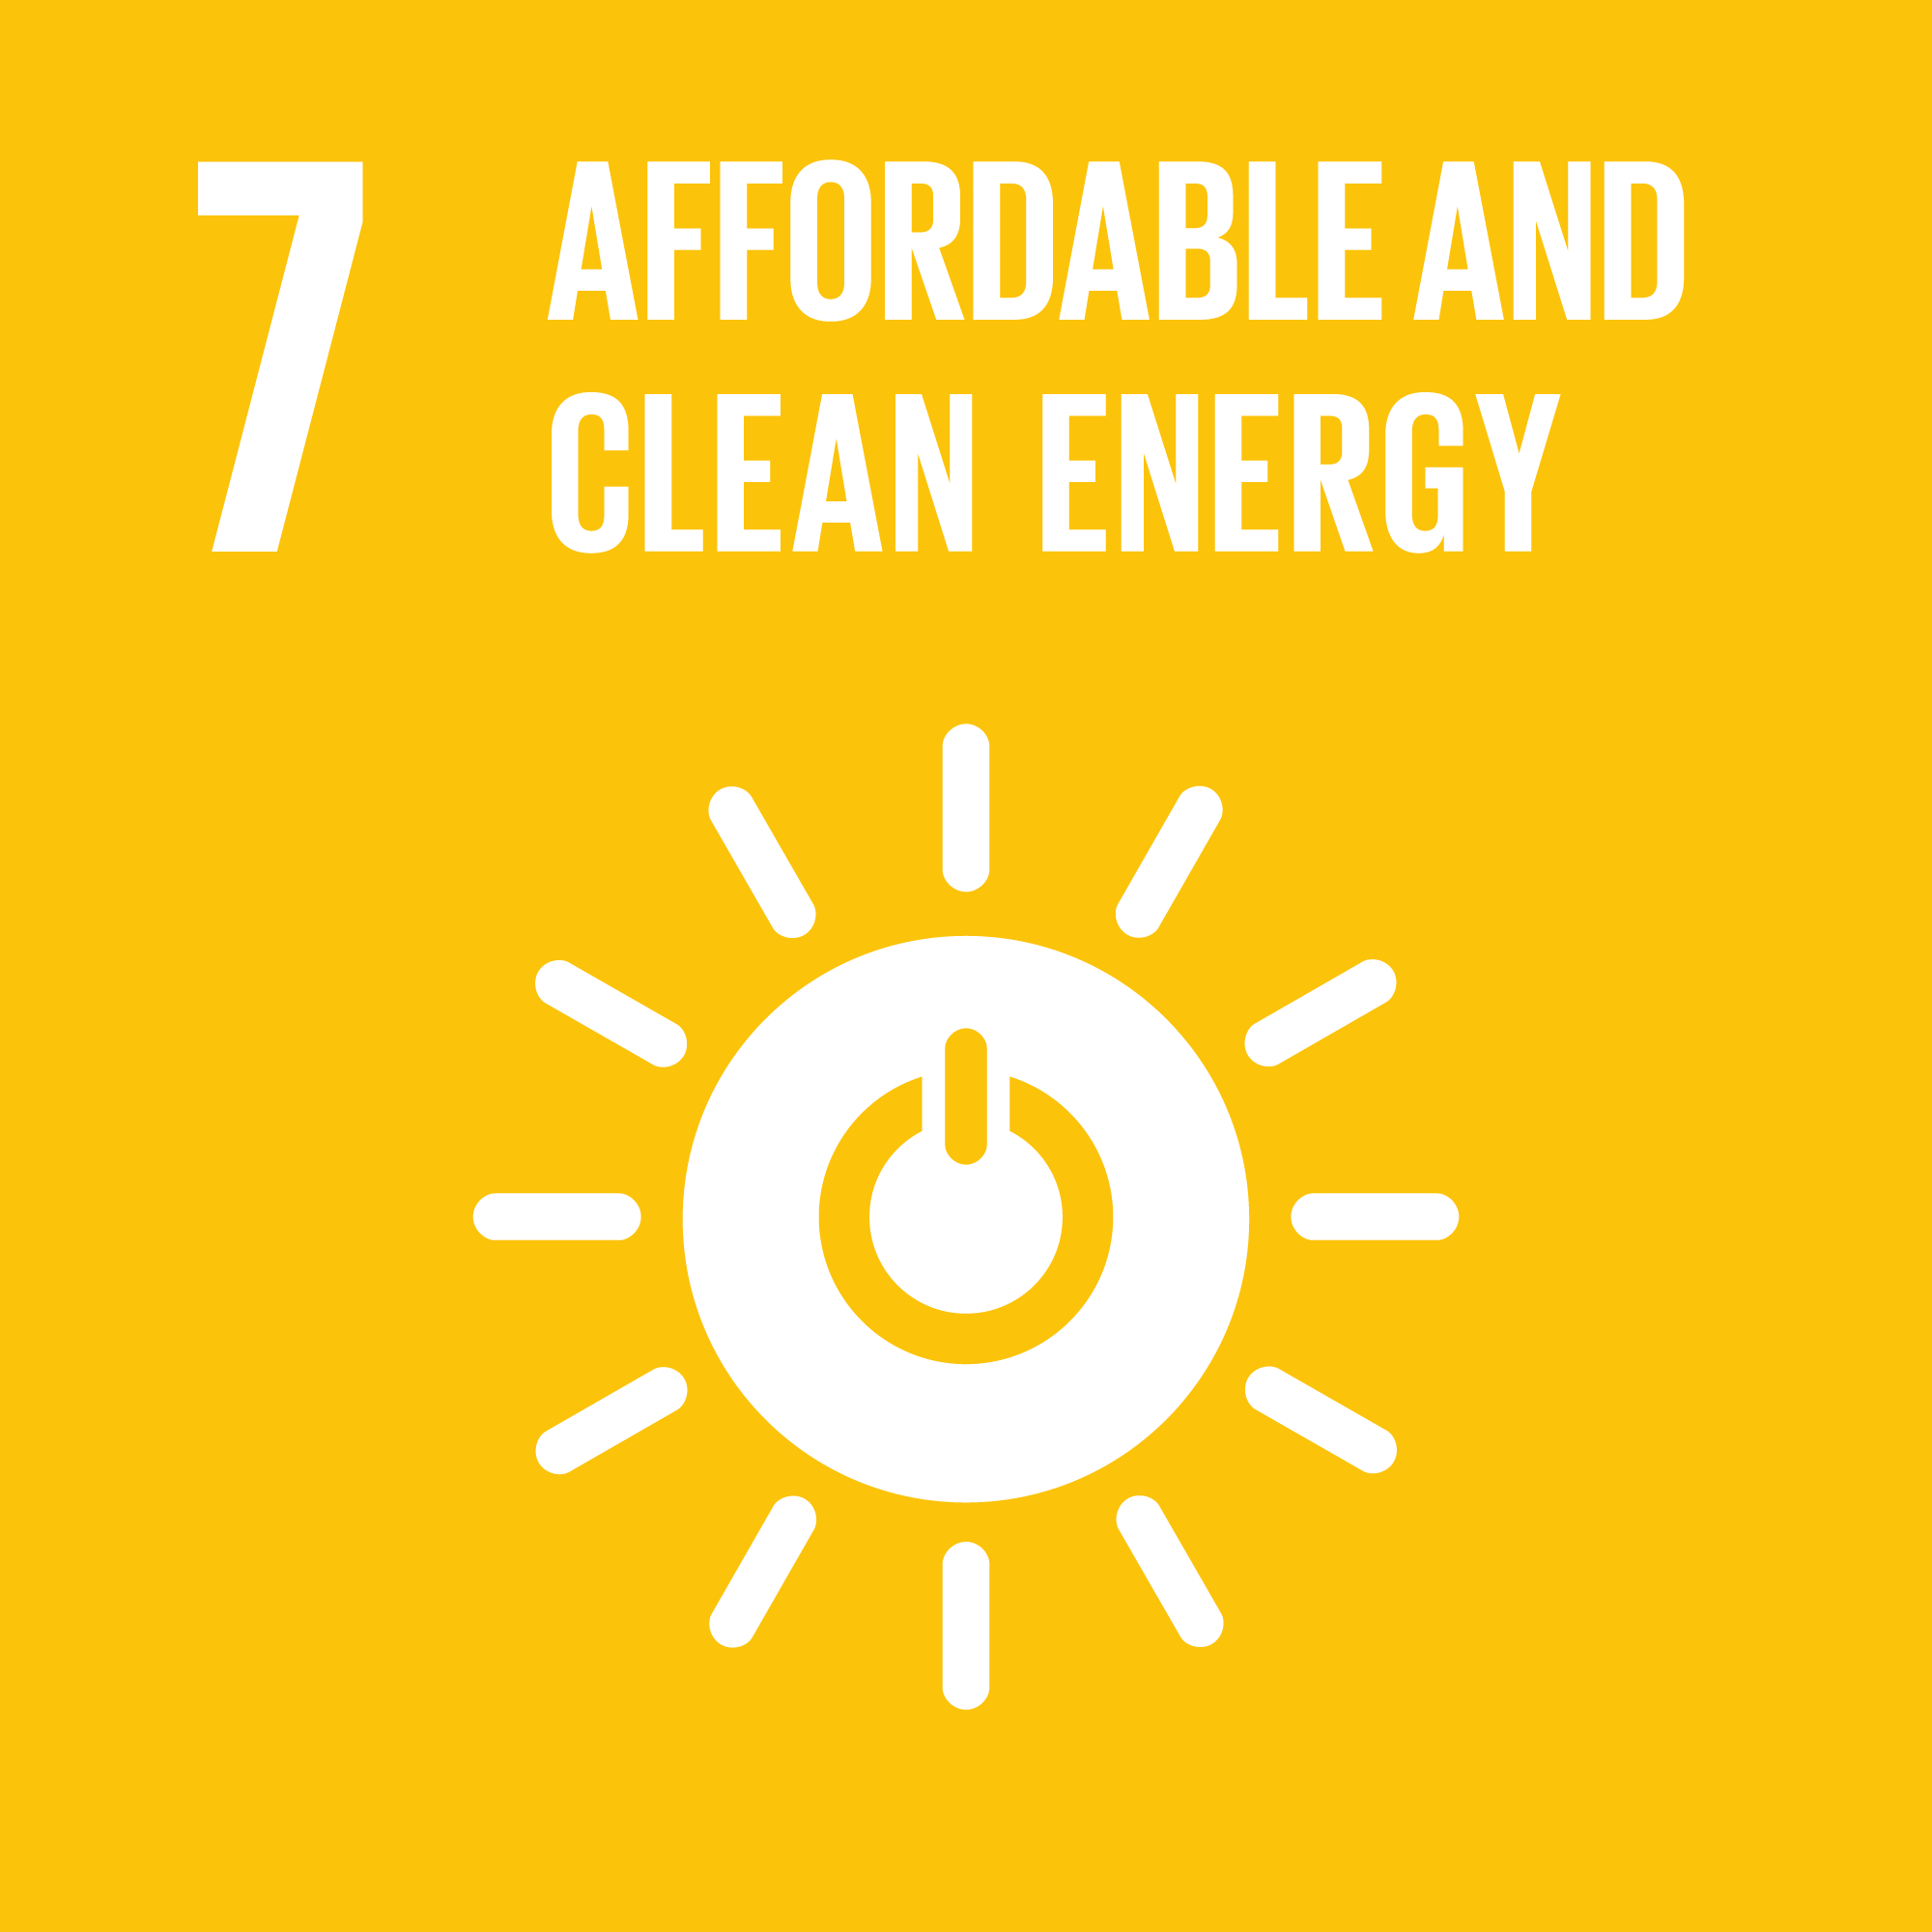 Goal 7: Affordable and Clean Energy - Ensure access to affordable, reliable, sustainable and modern energy for all